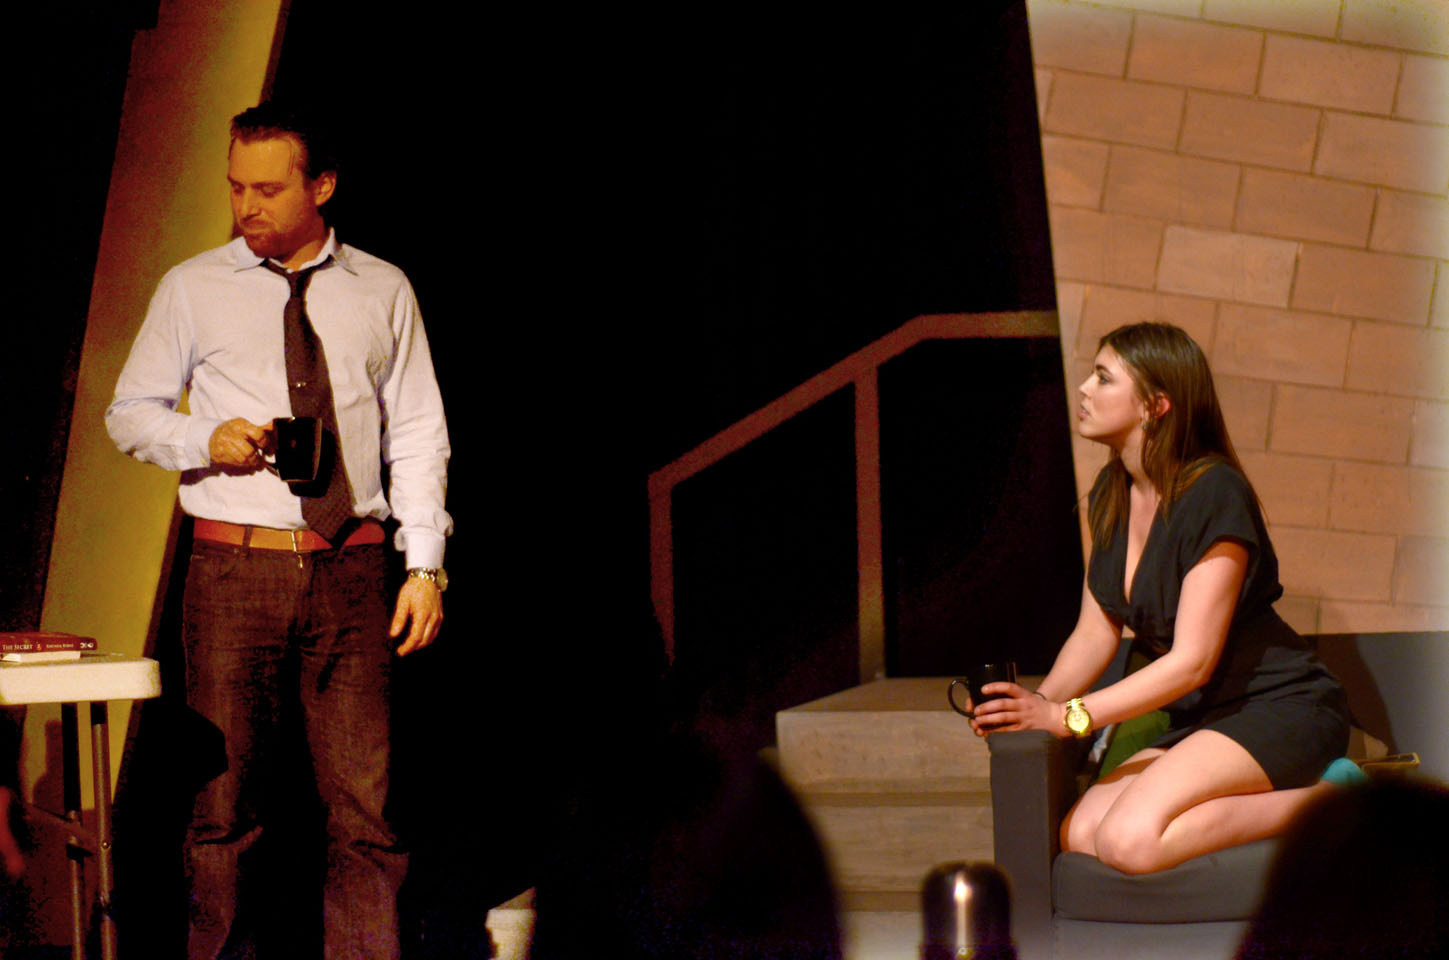 Conor Gomez playing Edward and Kristina Tywoniuk as Georgie in a scene from Theresa Rebeck's Spike Heels. 2nd place winner in the scene category at VADA's 2013 Showcase.